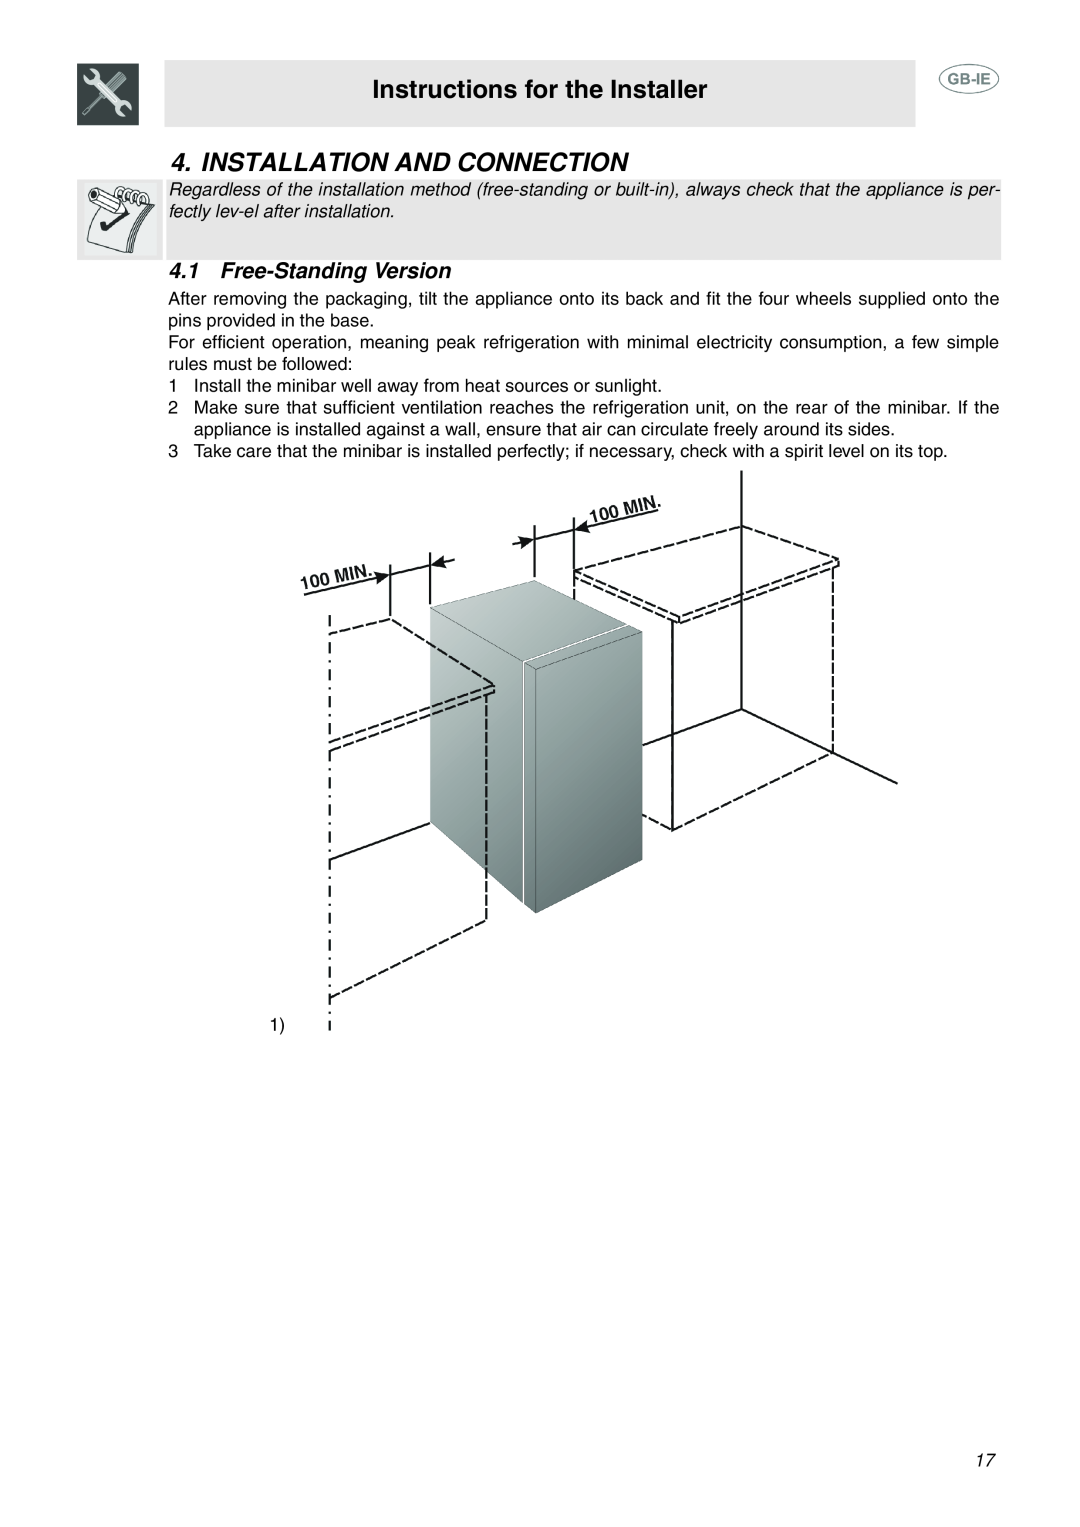 Smeg 914773118 manual Instructions for the Installer, Installation And Connection, Free-Standing Version 